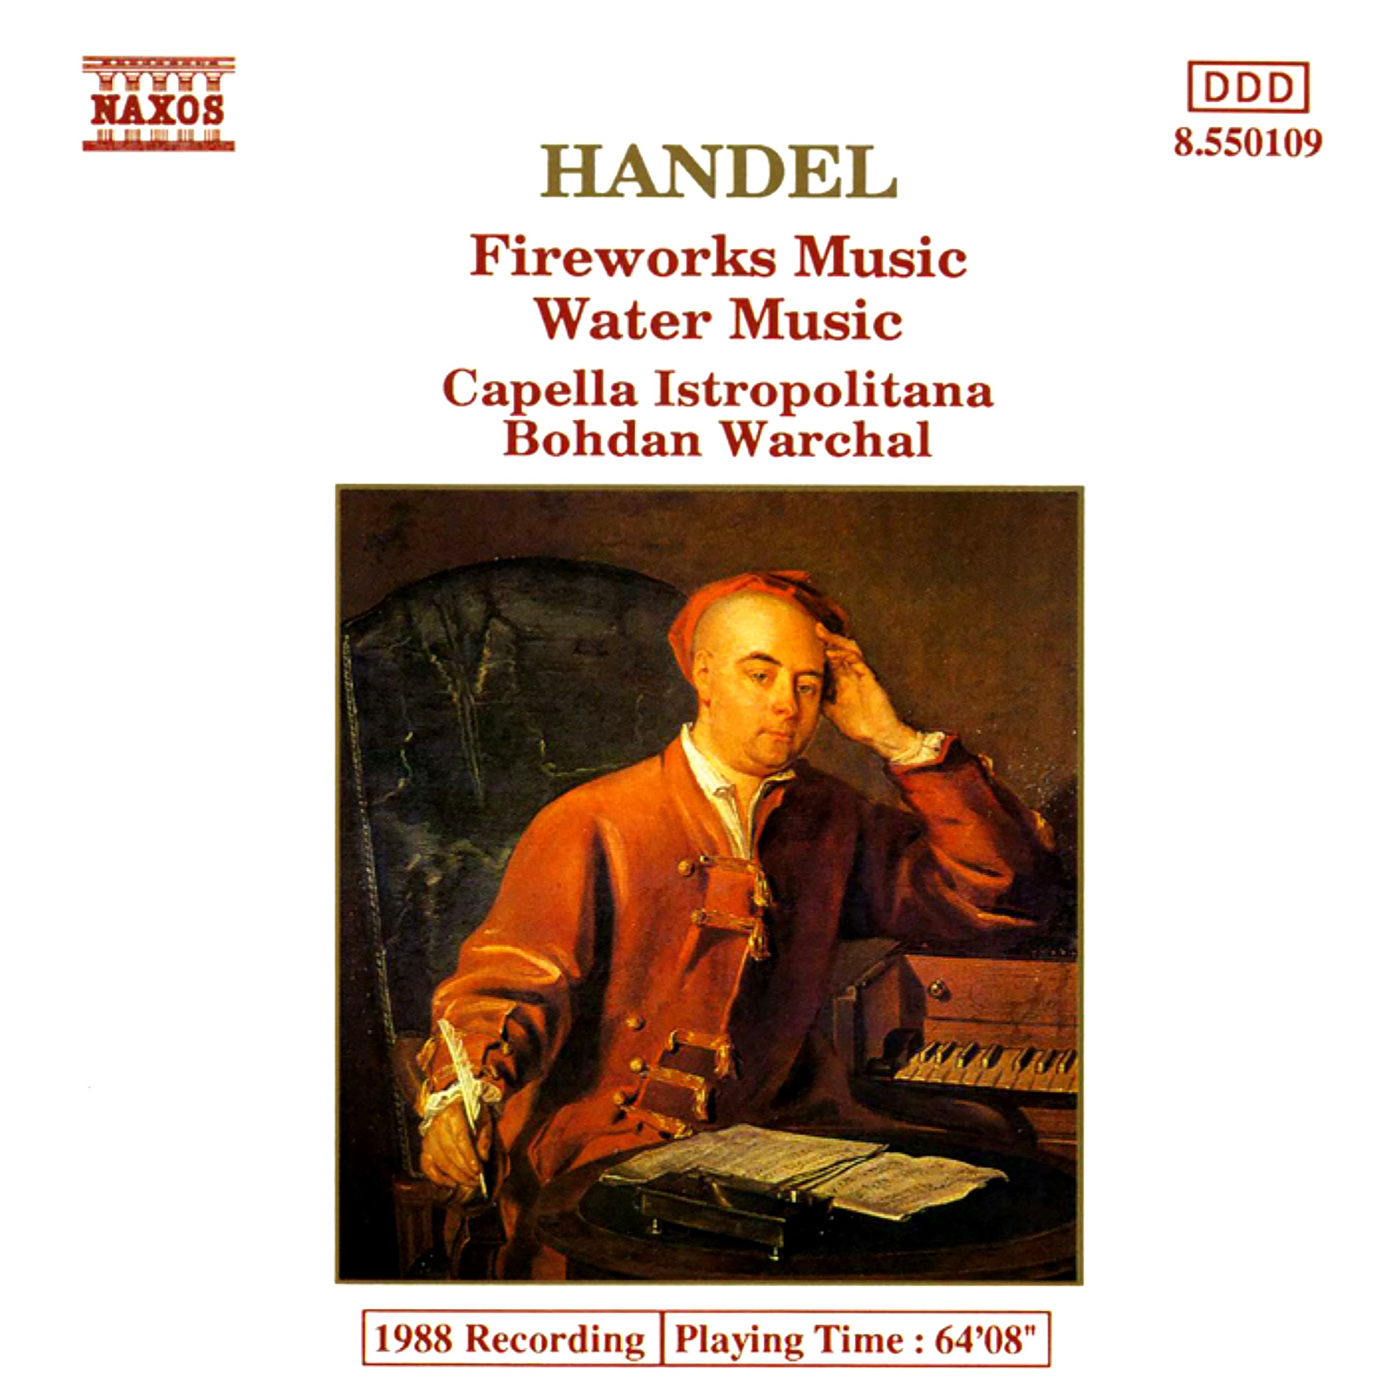 HANDEL: Music for the Royal Fireworks / Water Music